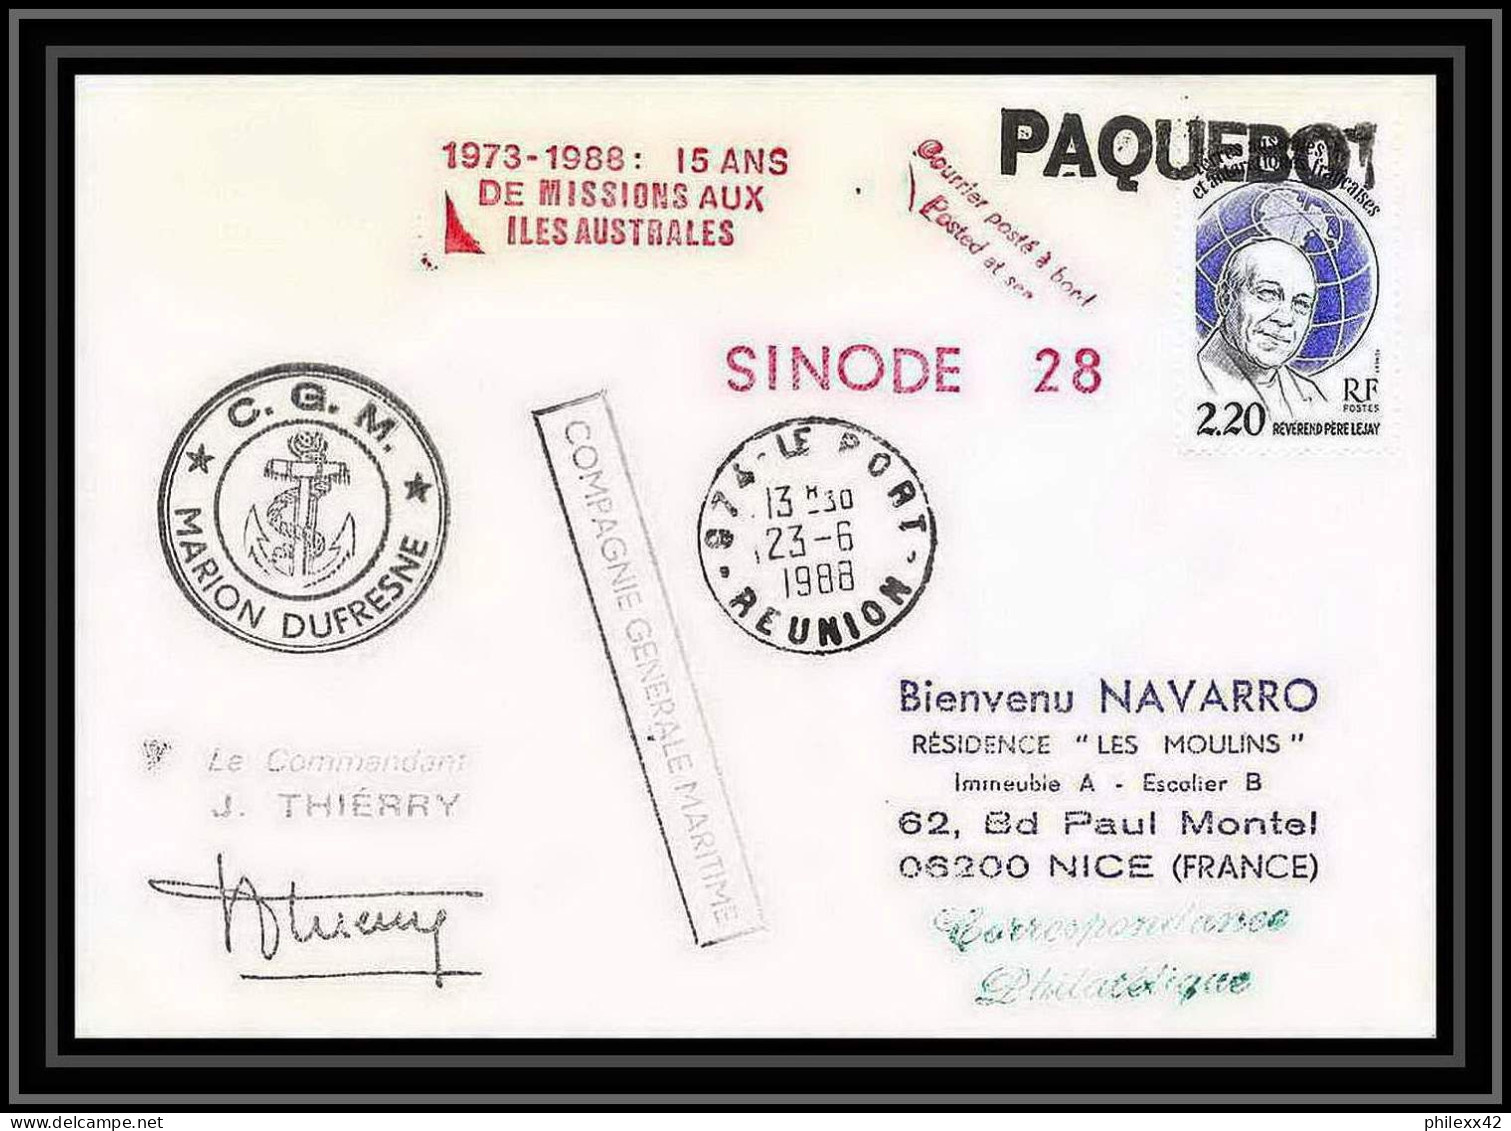 1561 Campagne Sinode 28 Marion Dufresne1988 Signé Signed Thierry TAAF Antarctic Terres Australes Lettre (cover) Paquebot - Spedizioni Antartiche